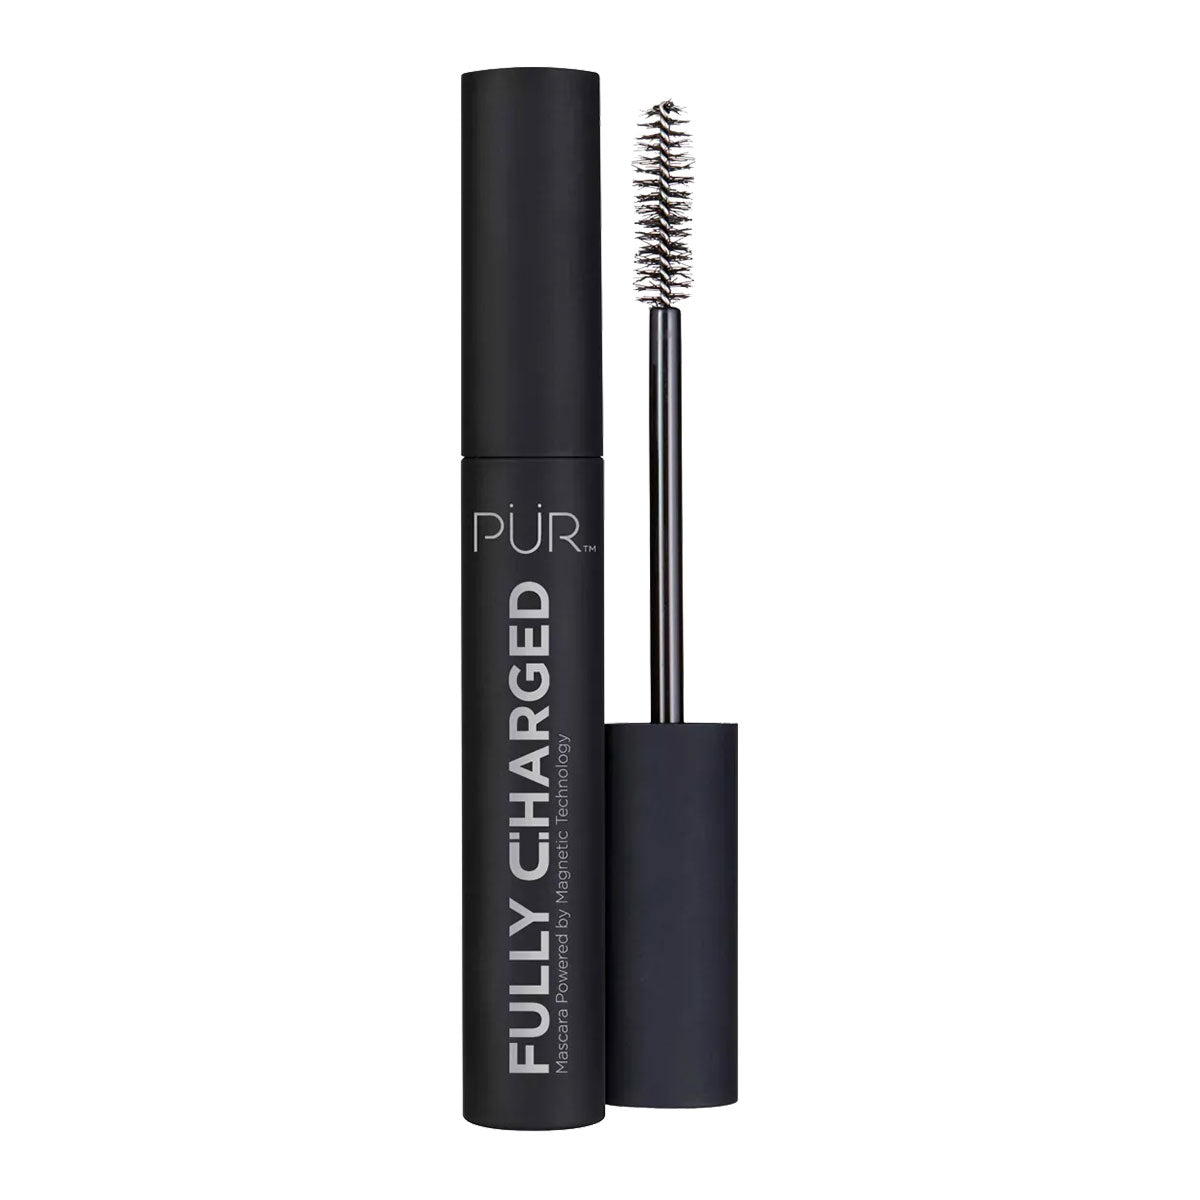 PÜR Fully Charged Mascara Powered By Magnetic Technology